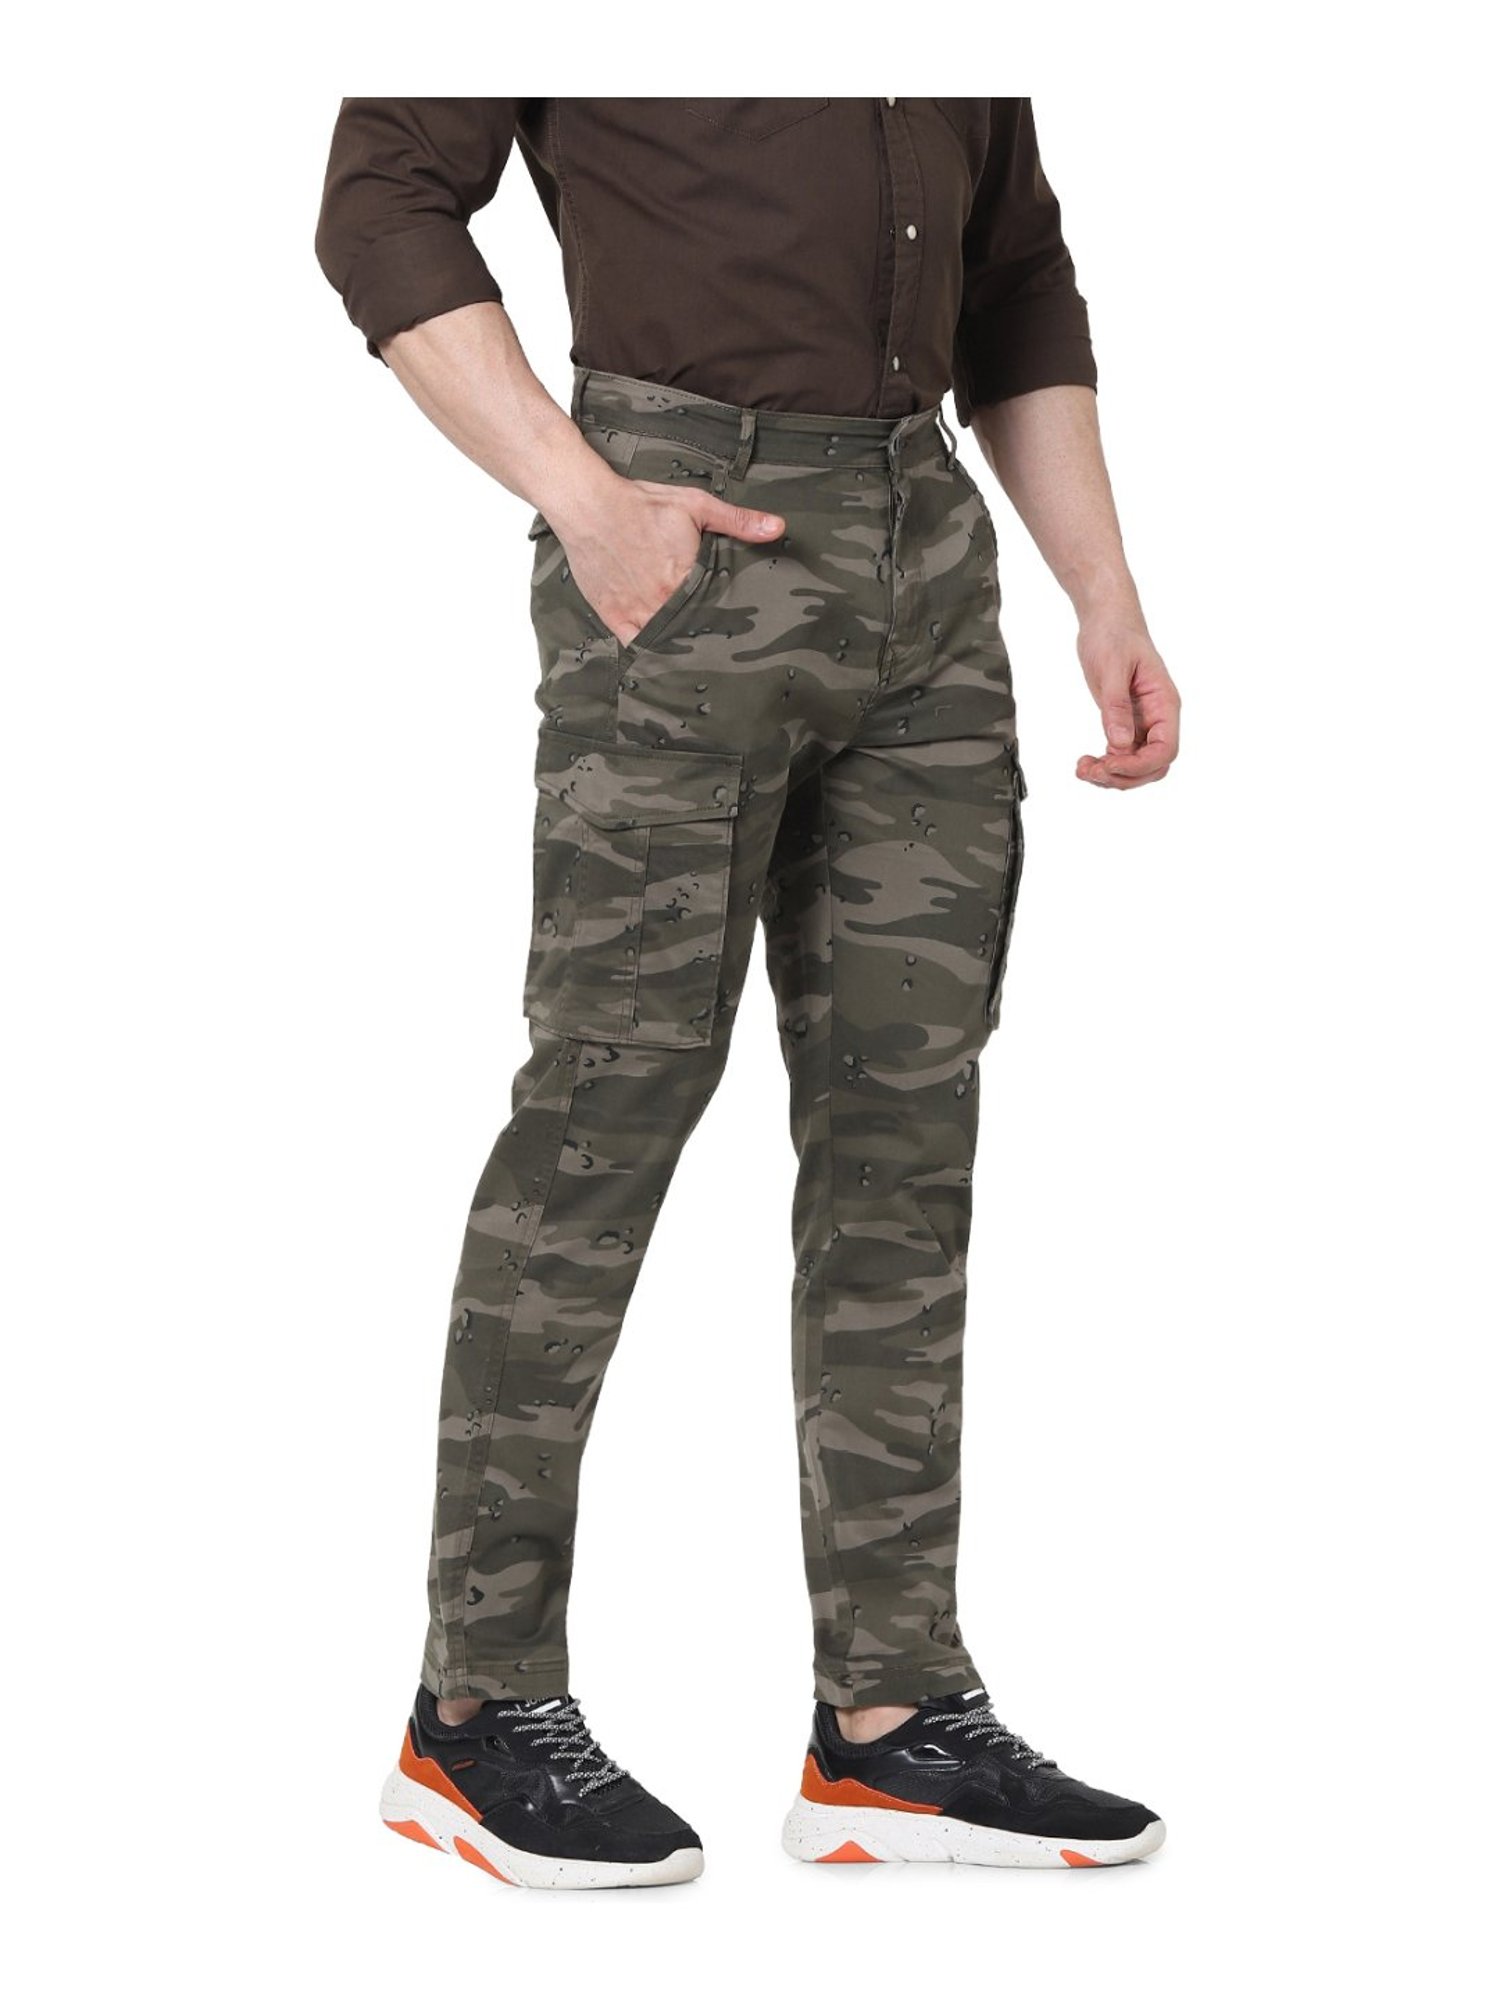 Camouflage Pants Men Ankle Length Casual Camo Pants Streetwear Summer Thin  Breathe Slim Fit Pants 2023 Brand New  Casual Pants  AliExpress